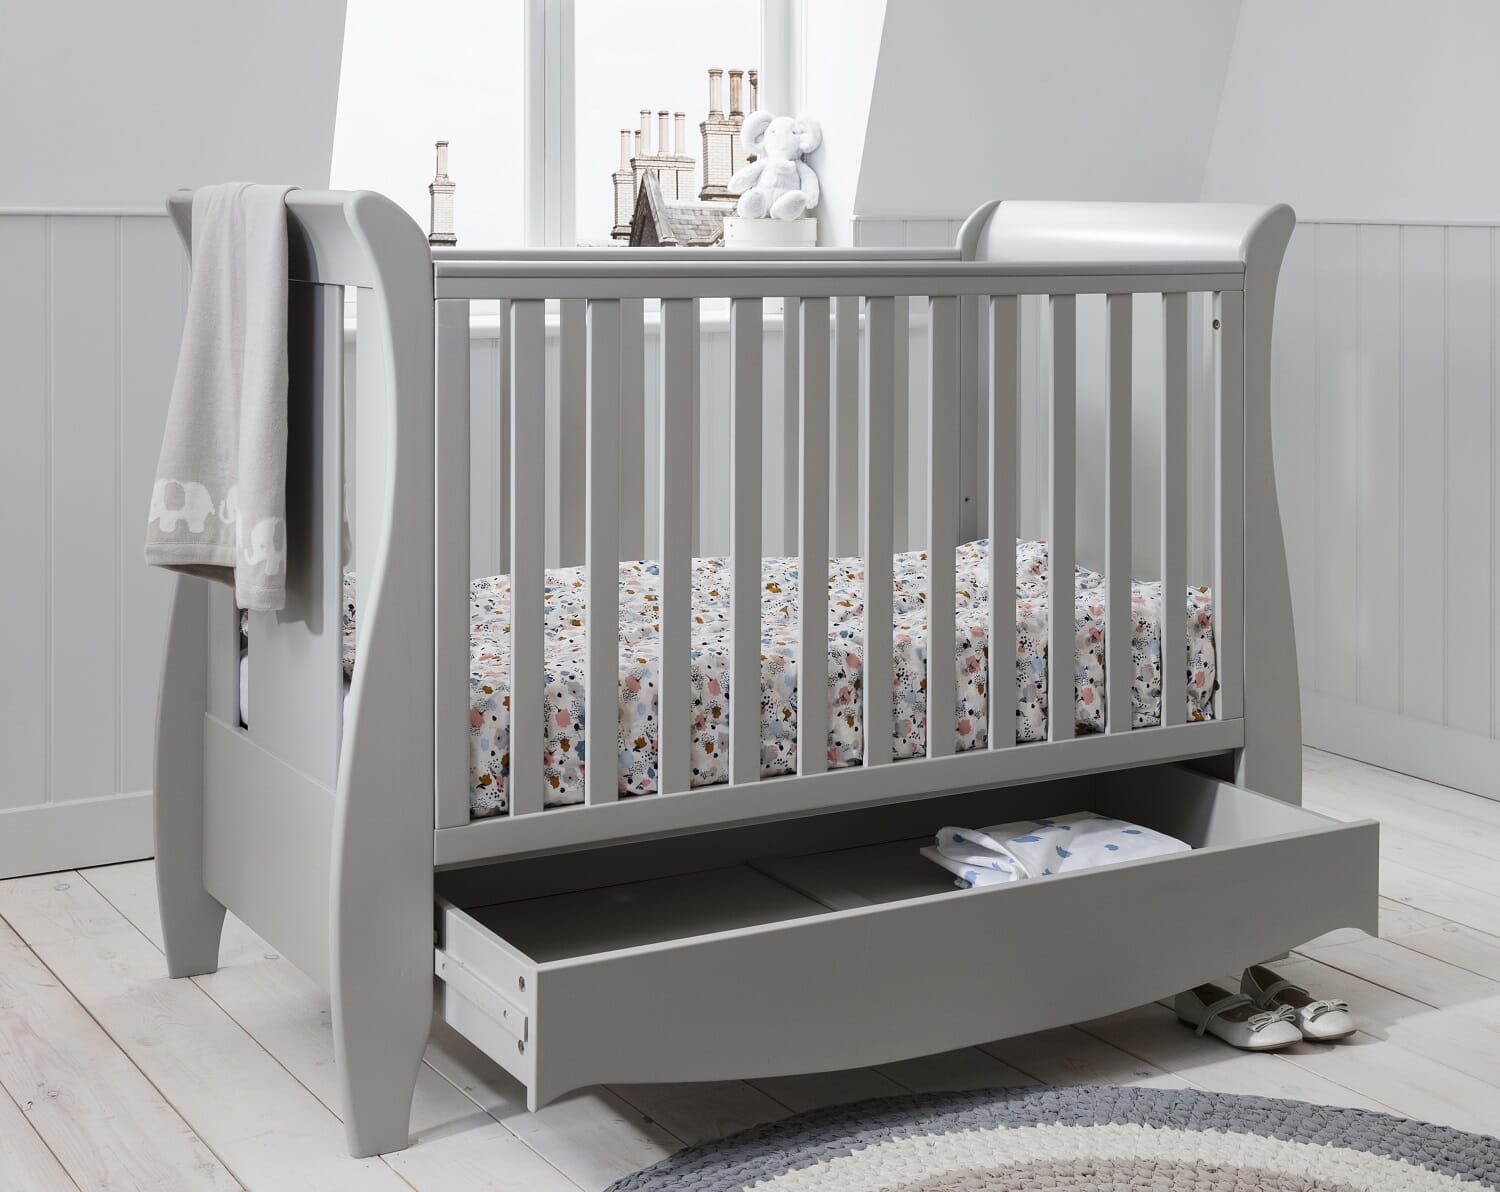 Two Piece Tutti Bambini Roma Nursery Furniture Set Space Saver Baby Cot Bed and Sleigh Design Chest of Drawers Truffle Grey Space Saver Solid Wood Furniture